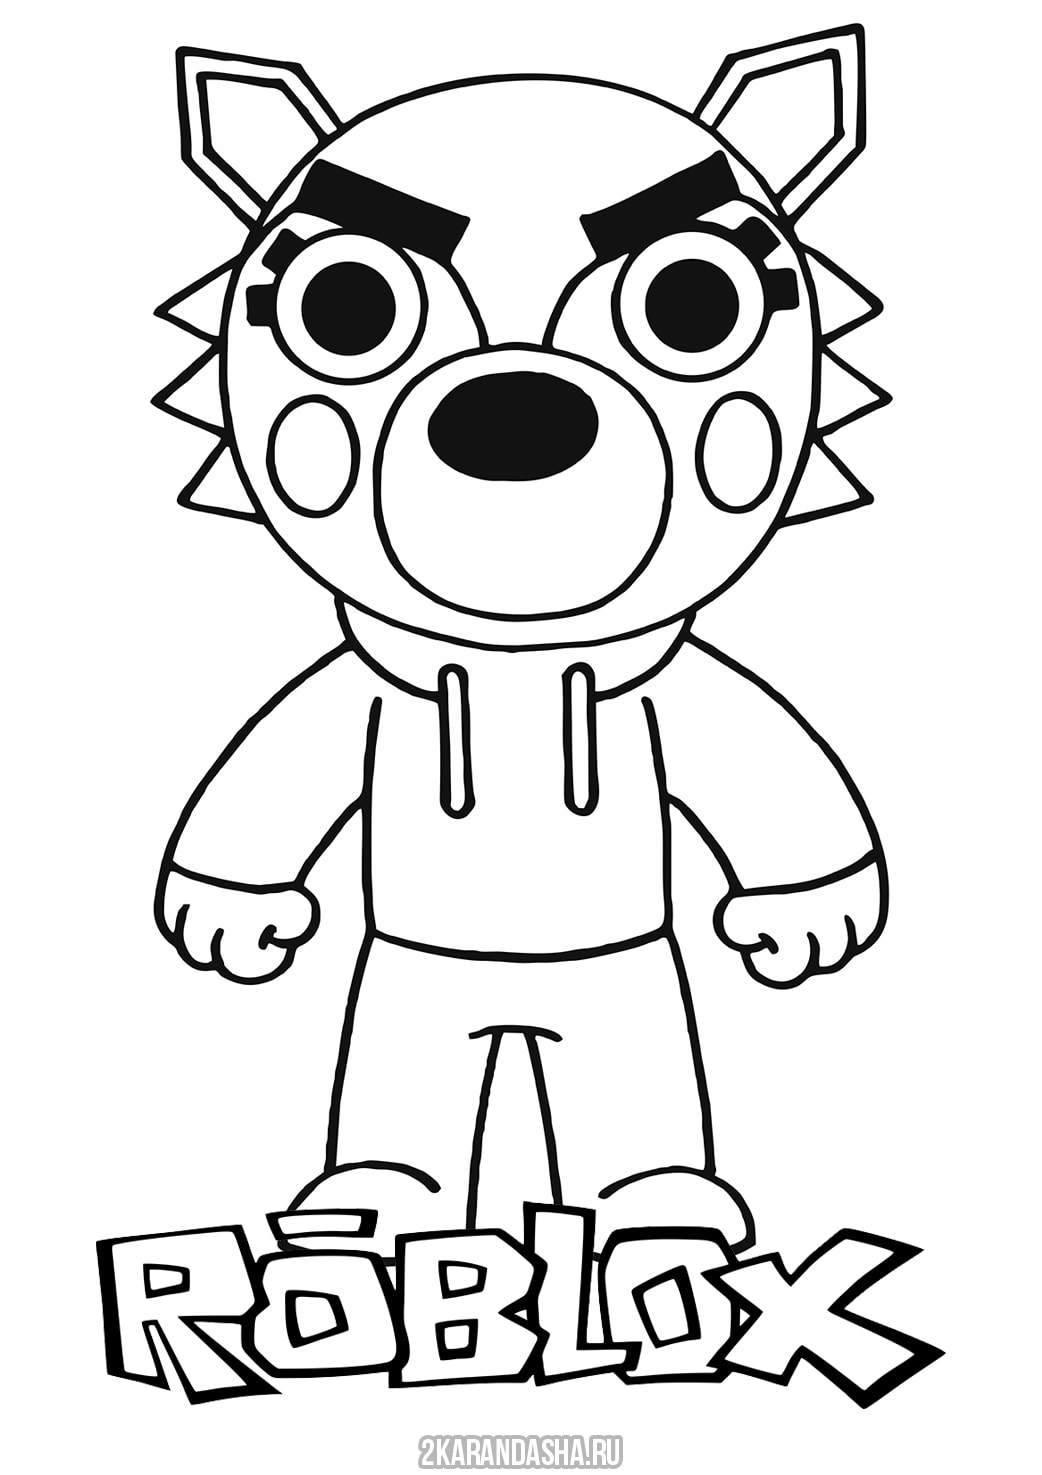 Coloring Page Roblox Piggi Willow Wolf Print Roblox - roblox basic beecoloring pages